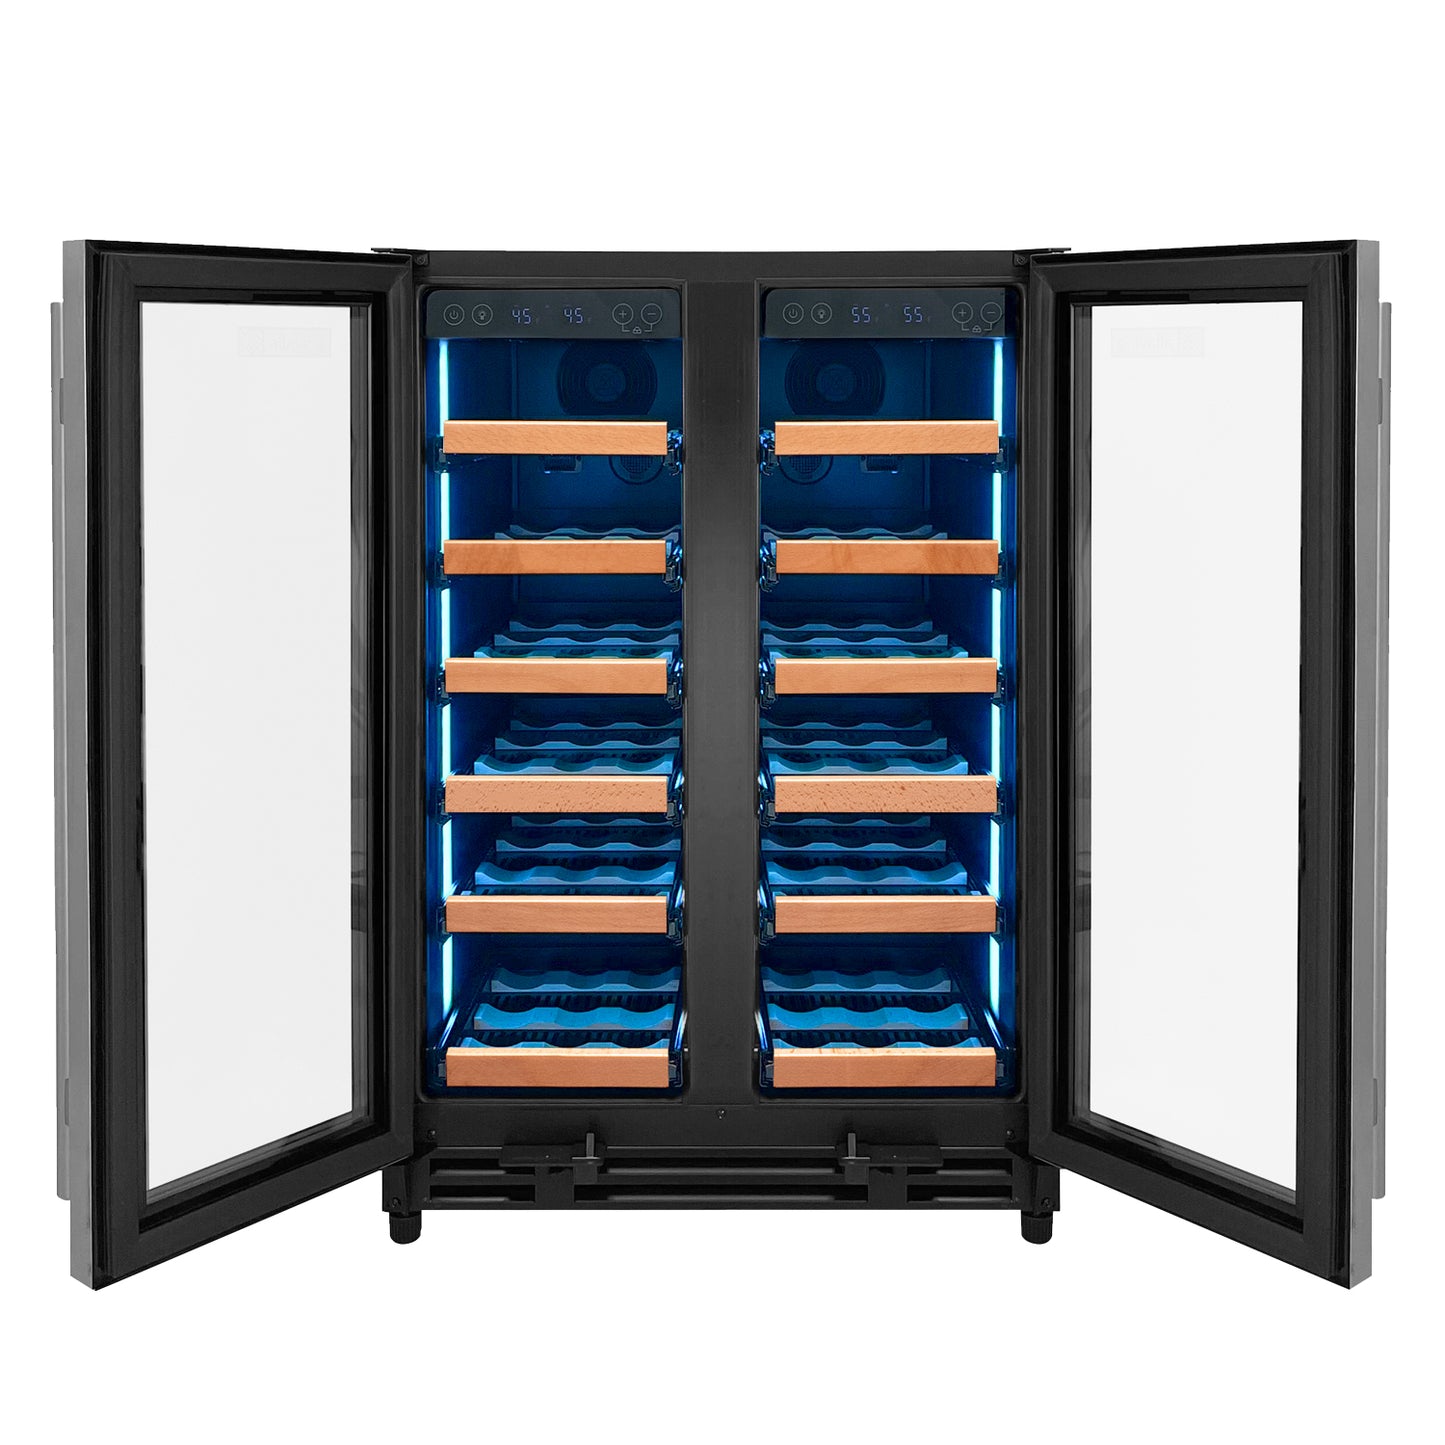 Allavino Reserva Series 36 Bottle Dual Zone Wine Refrigerator with Stainless Steel French Doors